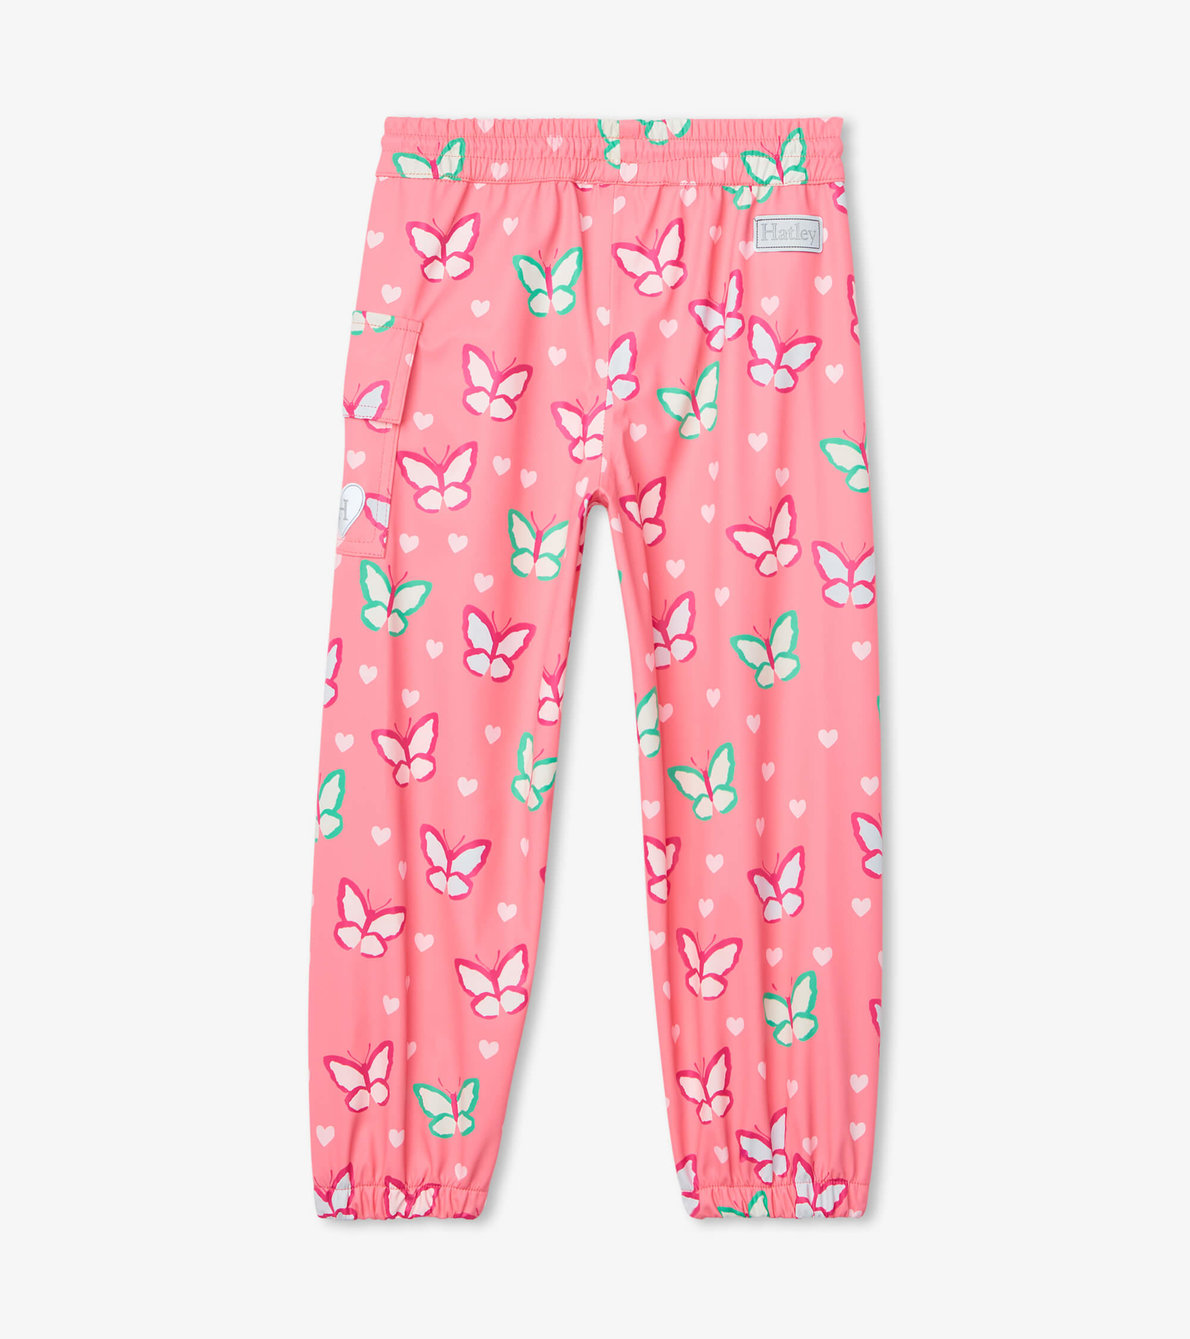 View larger image of Dainty Butterflies Colour Changing Kids Rain Pants